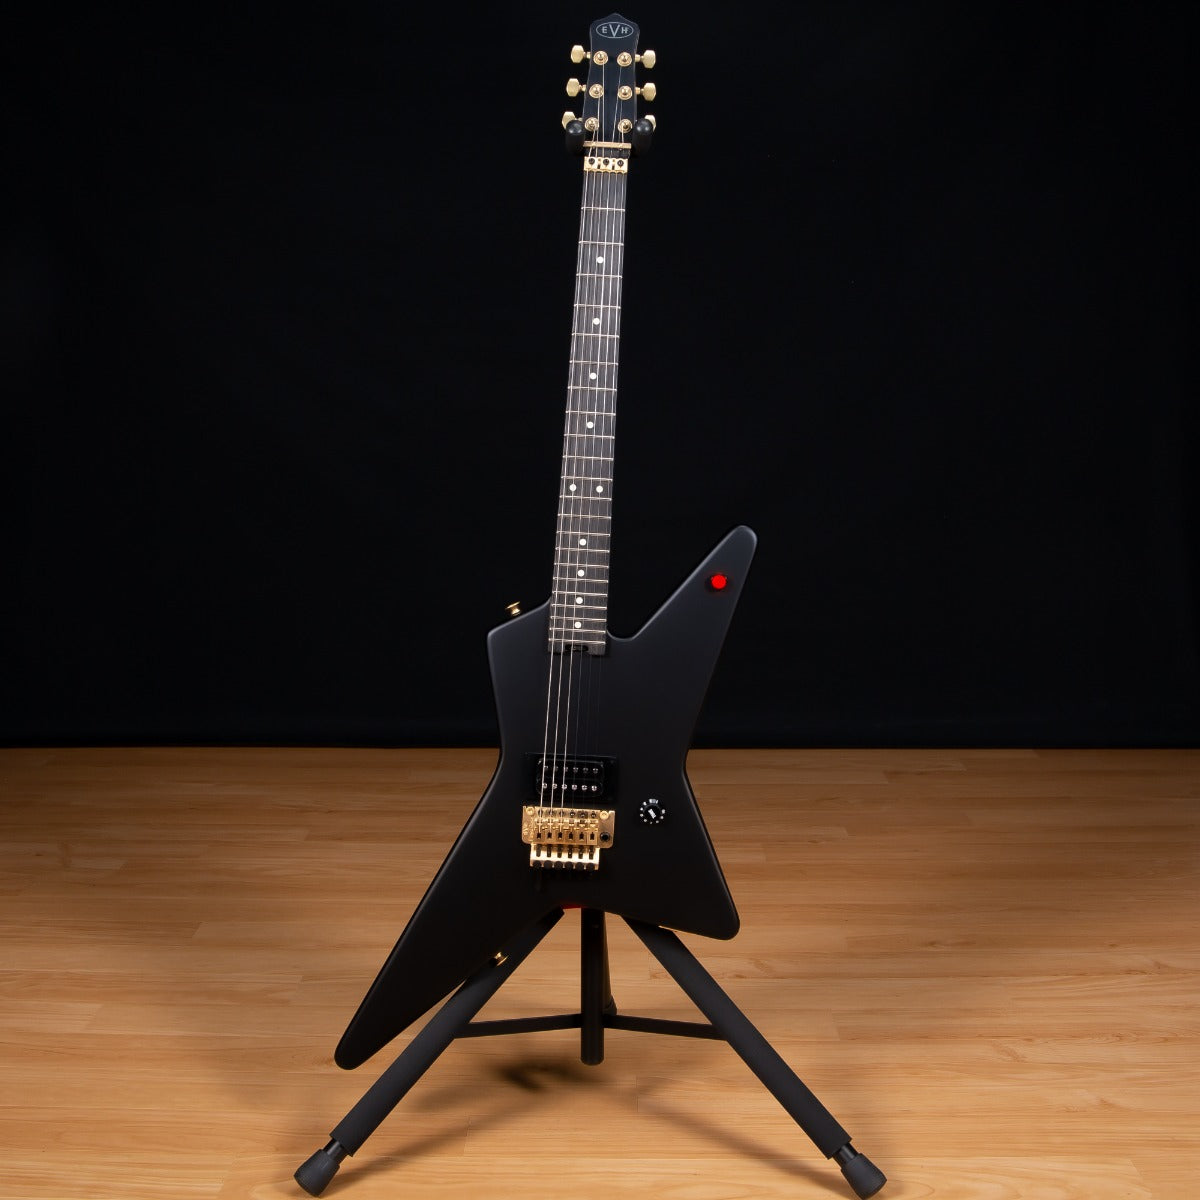 EVH Star Limited Edition Electric Guitar - Stealth Black view 2